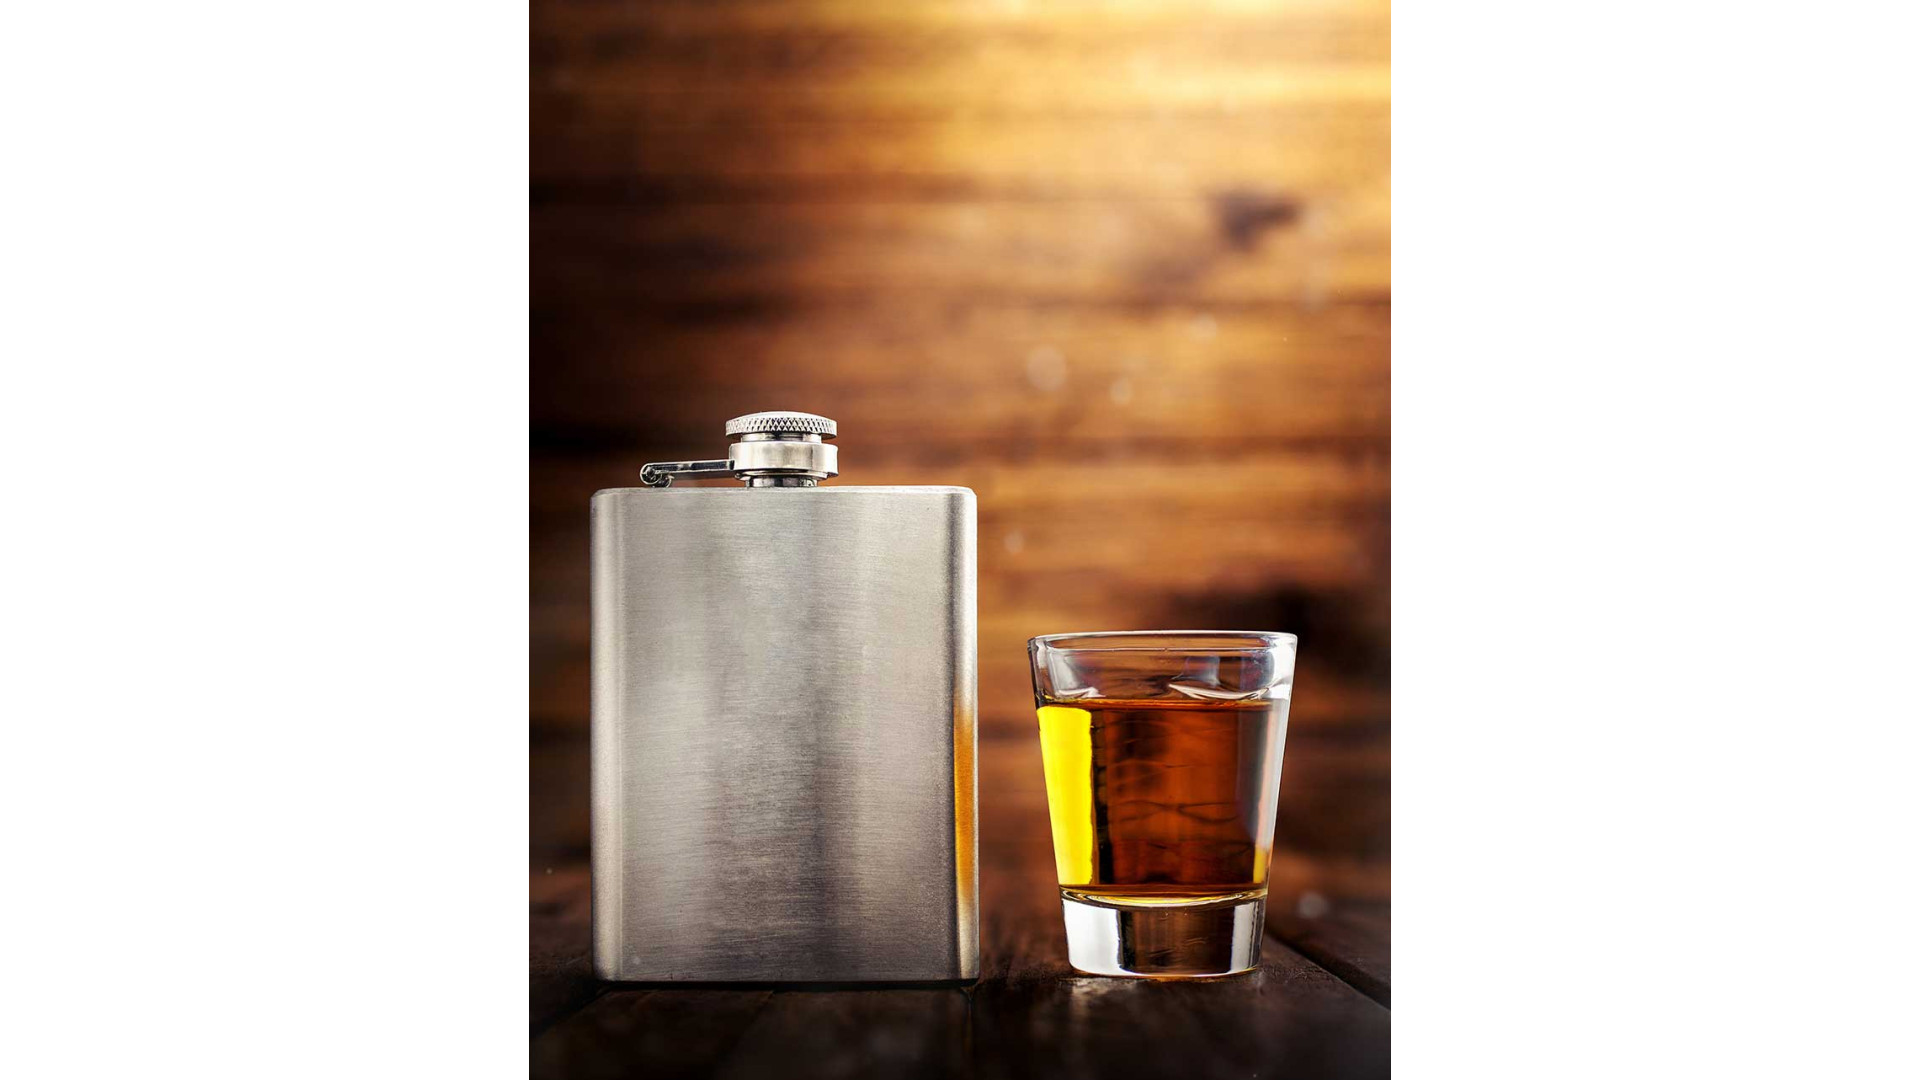 https://www.ckbproducts.com/image/cache/catalog/Ckb%20blog/How-To-Use-A-Hip-Flask-To-Store-Liquor-1920x1080.jpg